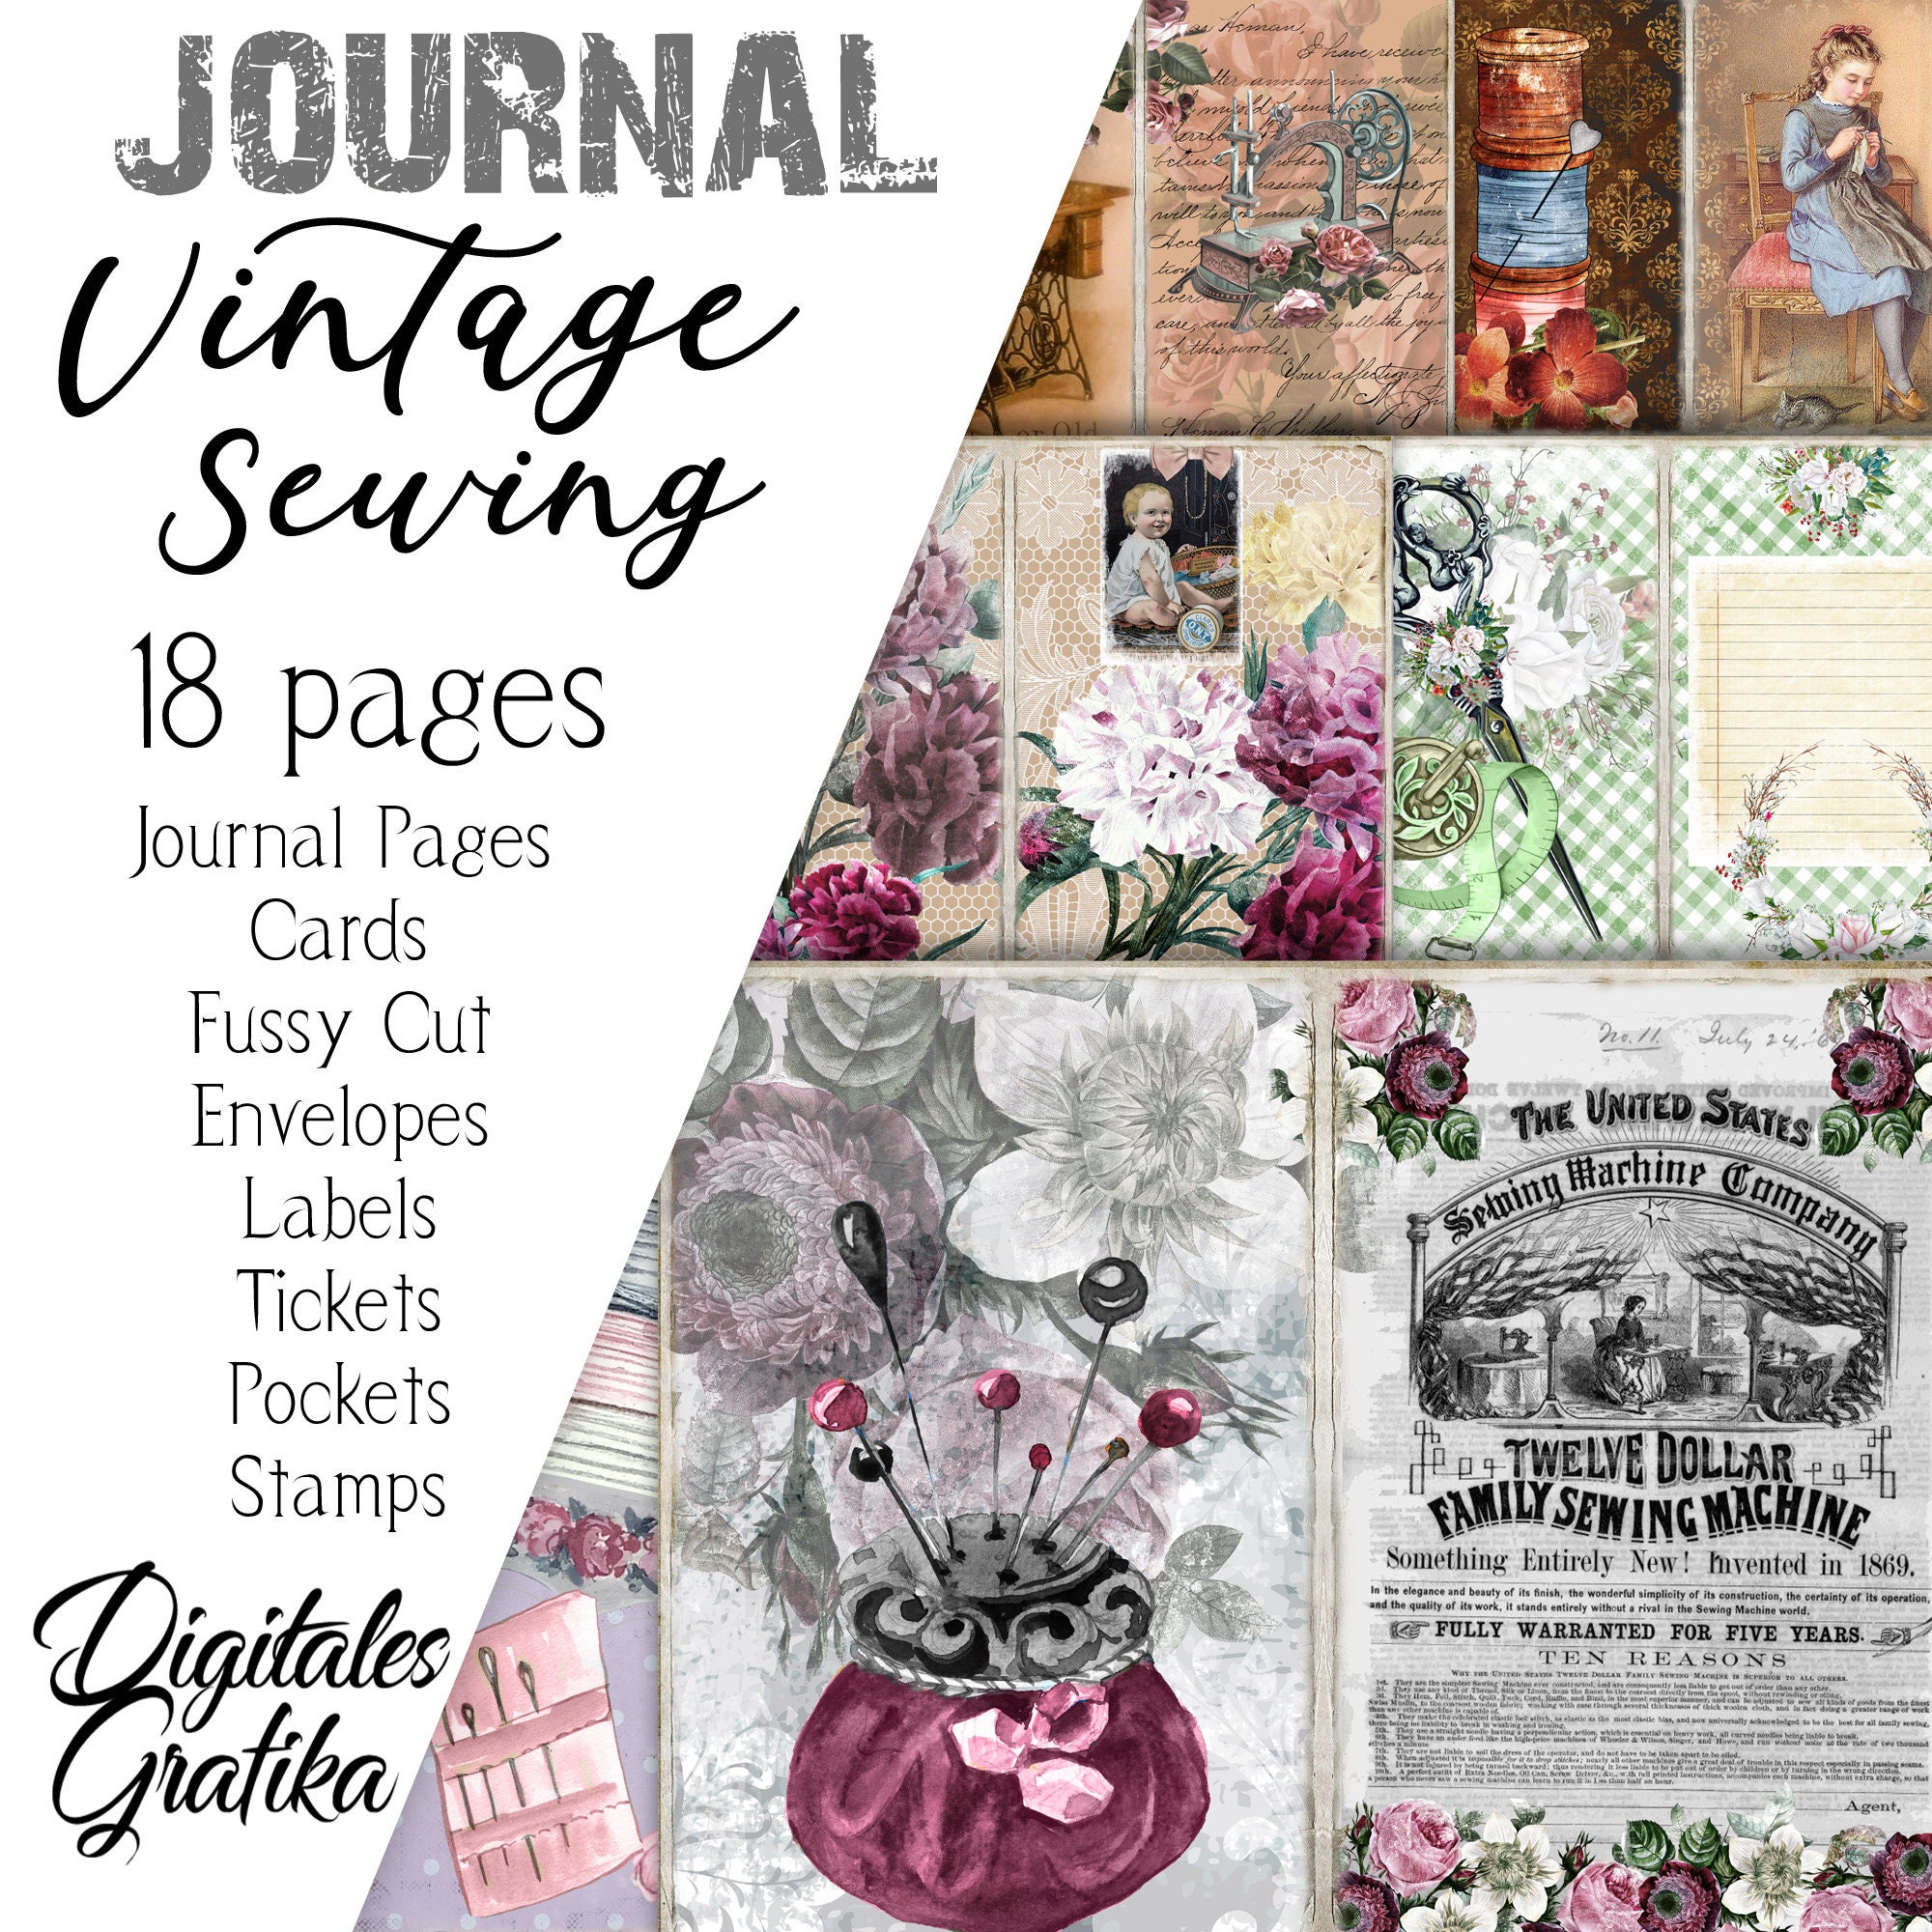 Embroidery Journal Kit Junk Journal Pages DIY Needlework Book